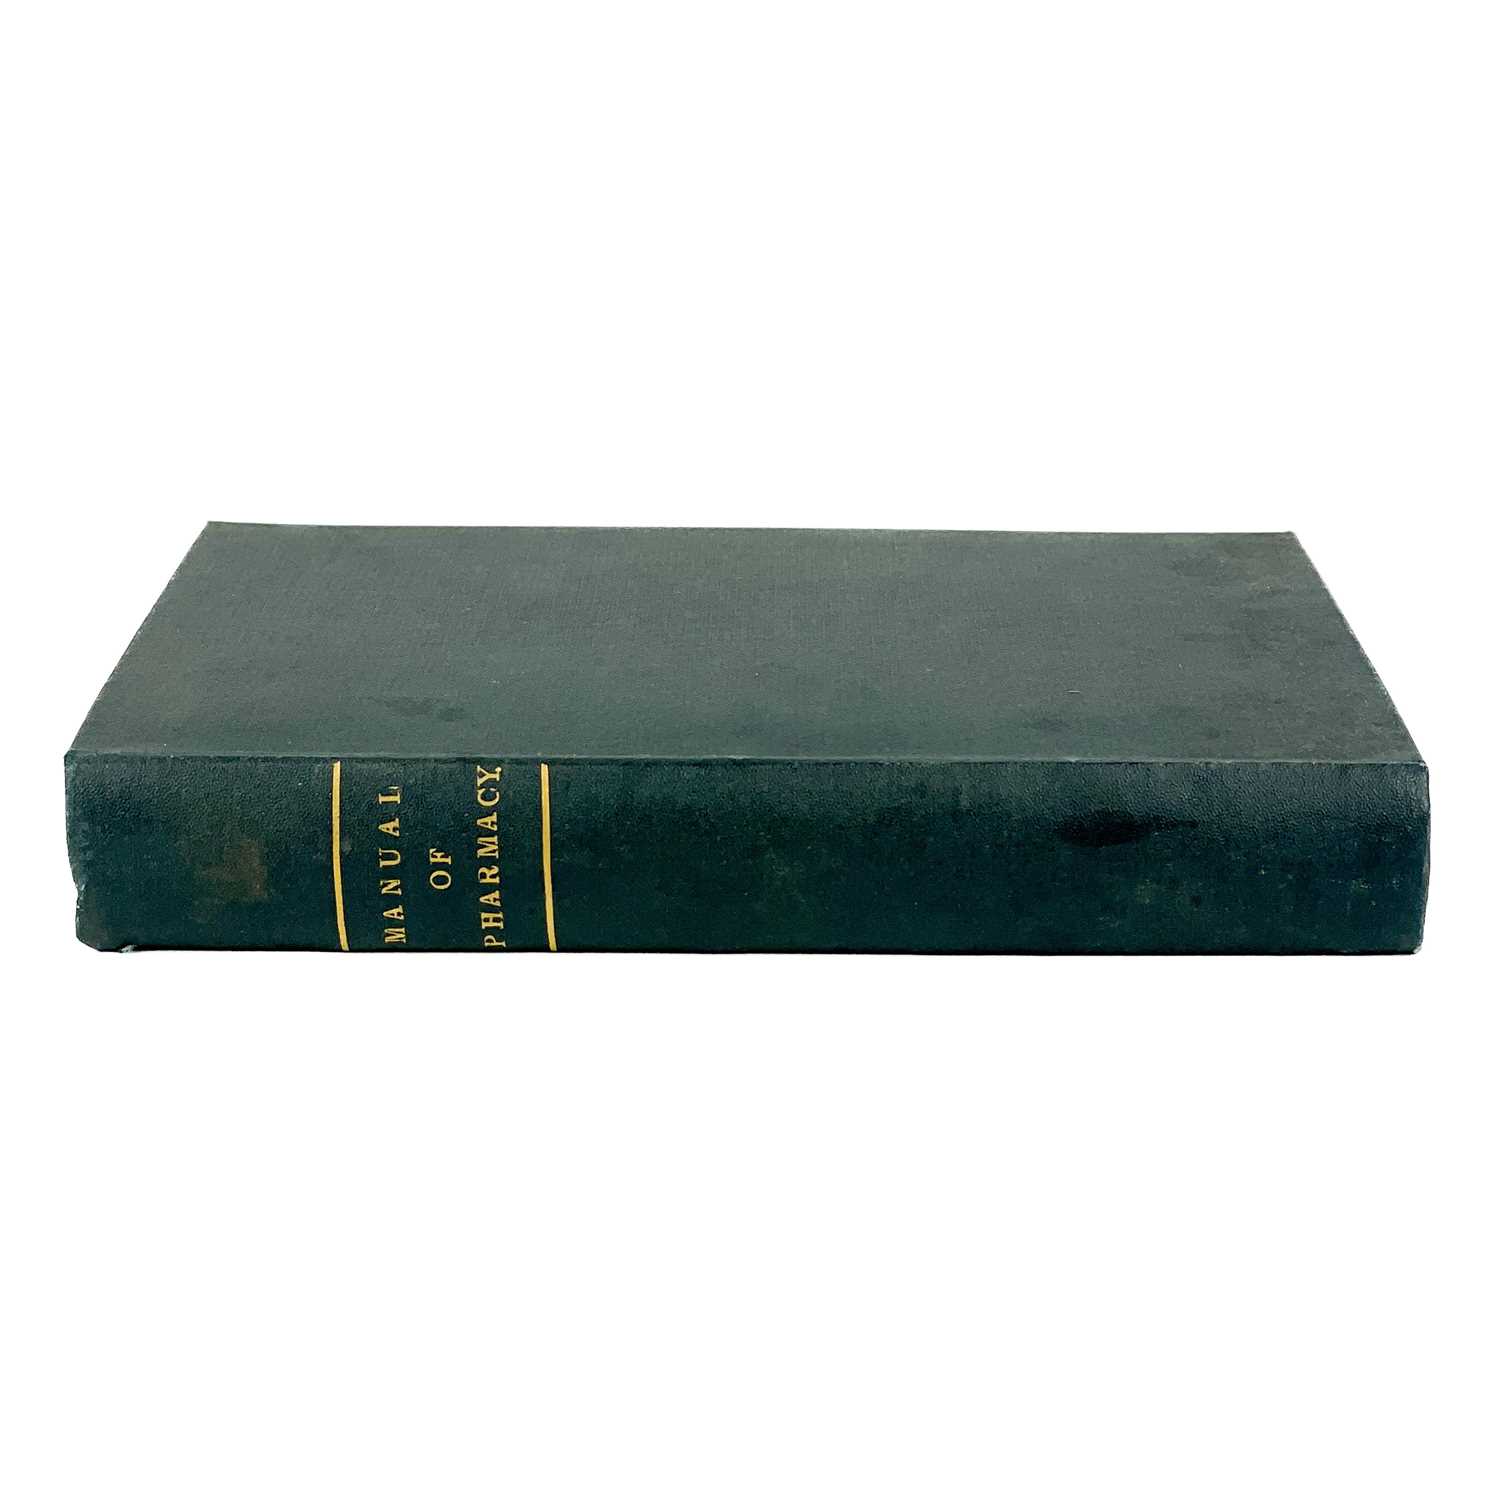 A MANUAL OF PHARMACY By William Thomas Brande (1829)